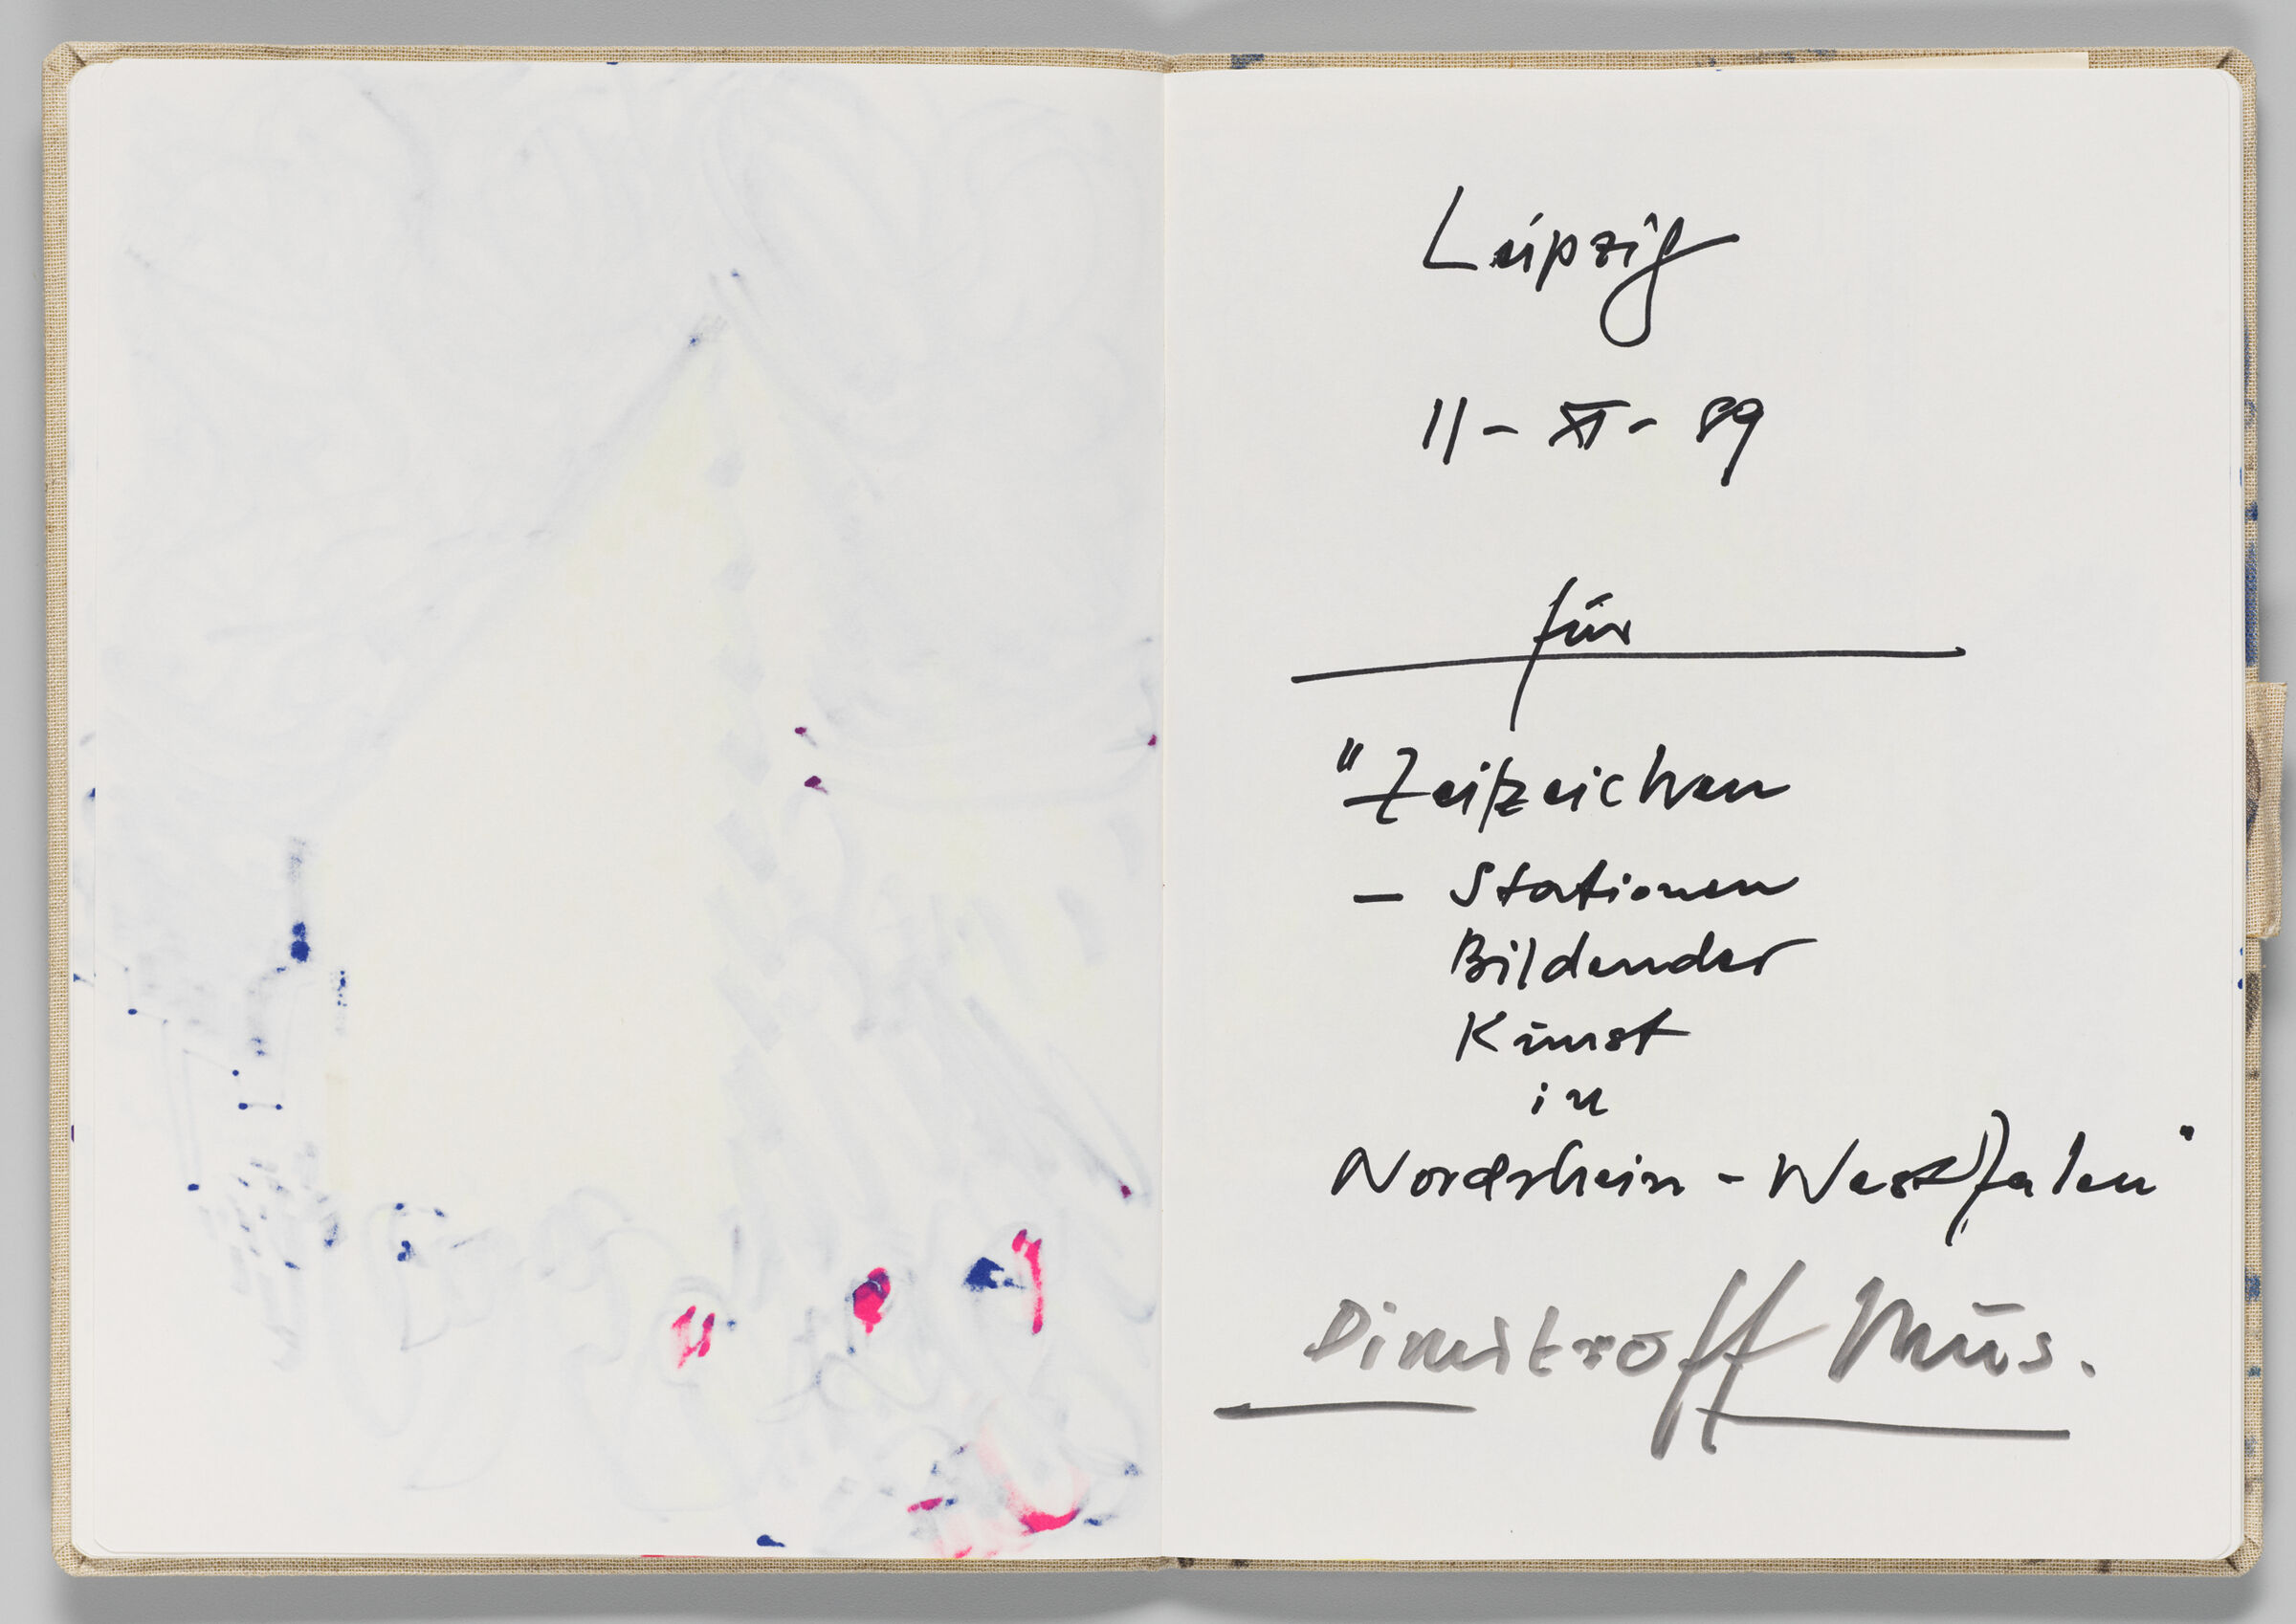 Untitled (Bleed-Through Of Previous Page, Left Page); Untitled (Notes On Travel Itinerary, Right Page)